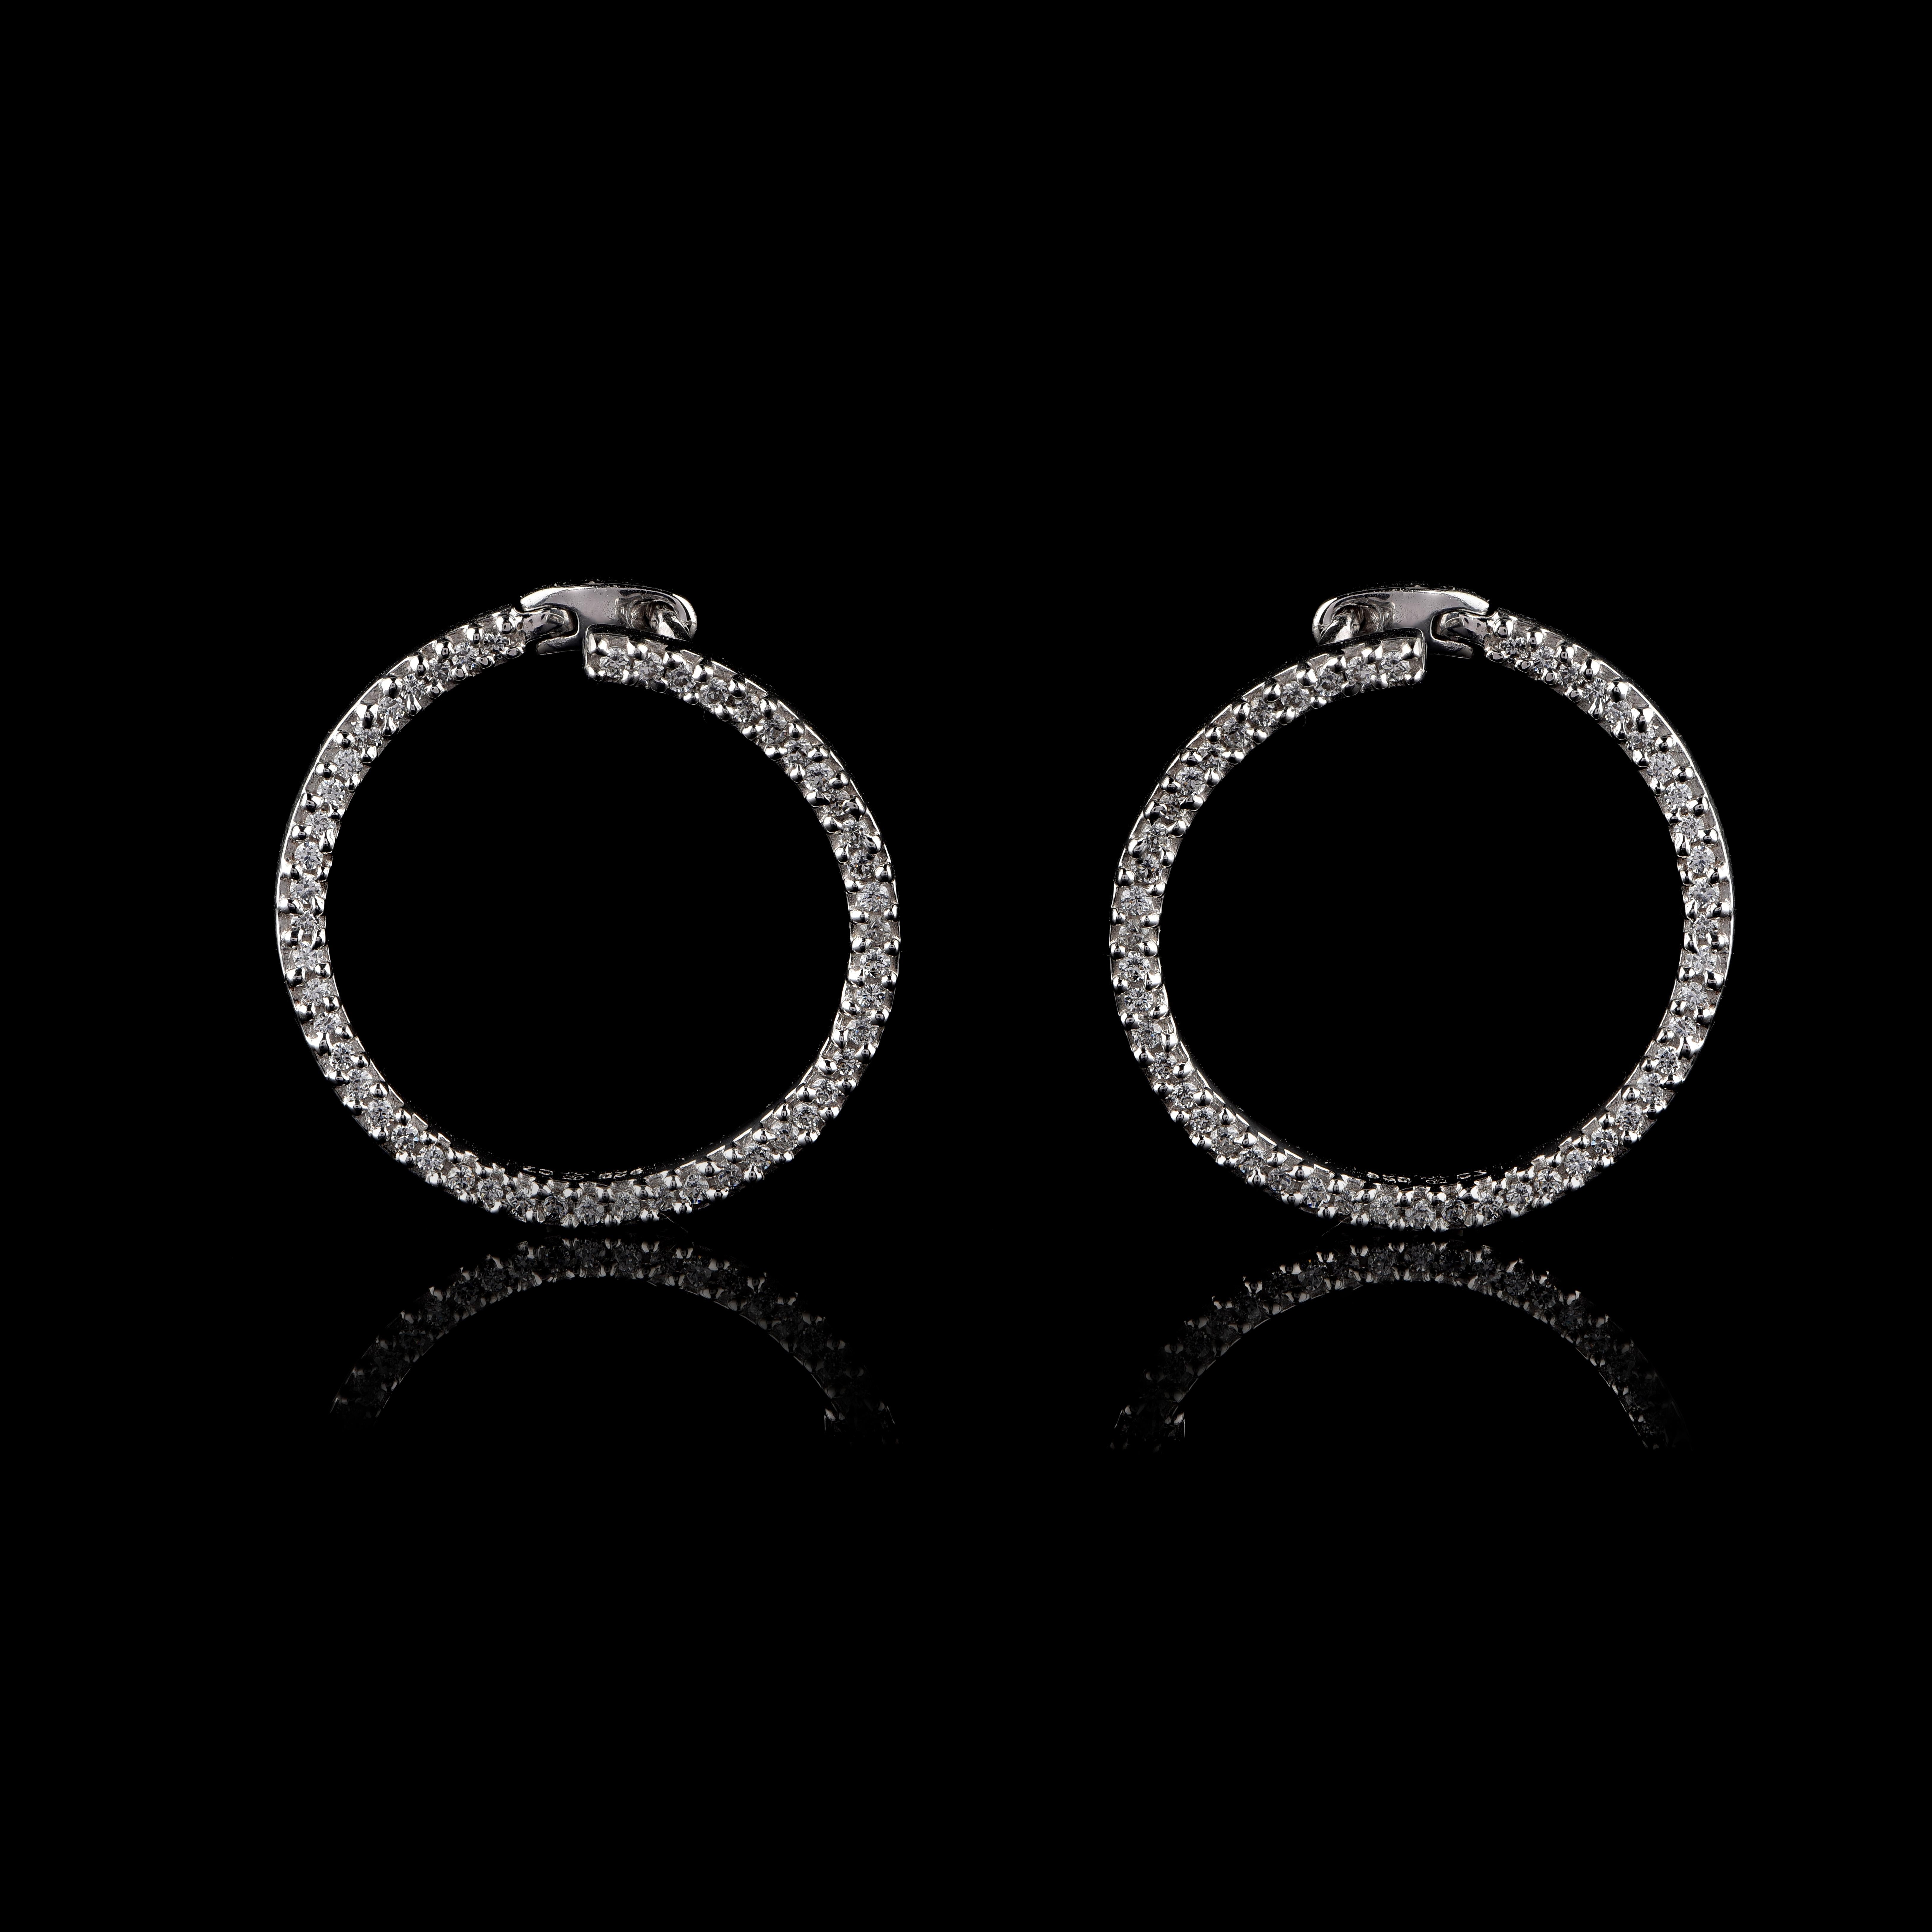 These circular earrings are studded with 100 brilliant cut diamonds in prong setting. Intricately hand-crafted by our in-house experts in 18 KT white gold. The diamonds are graded H-I Color, I2 Clarity.